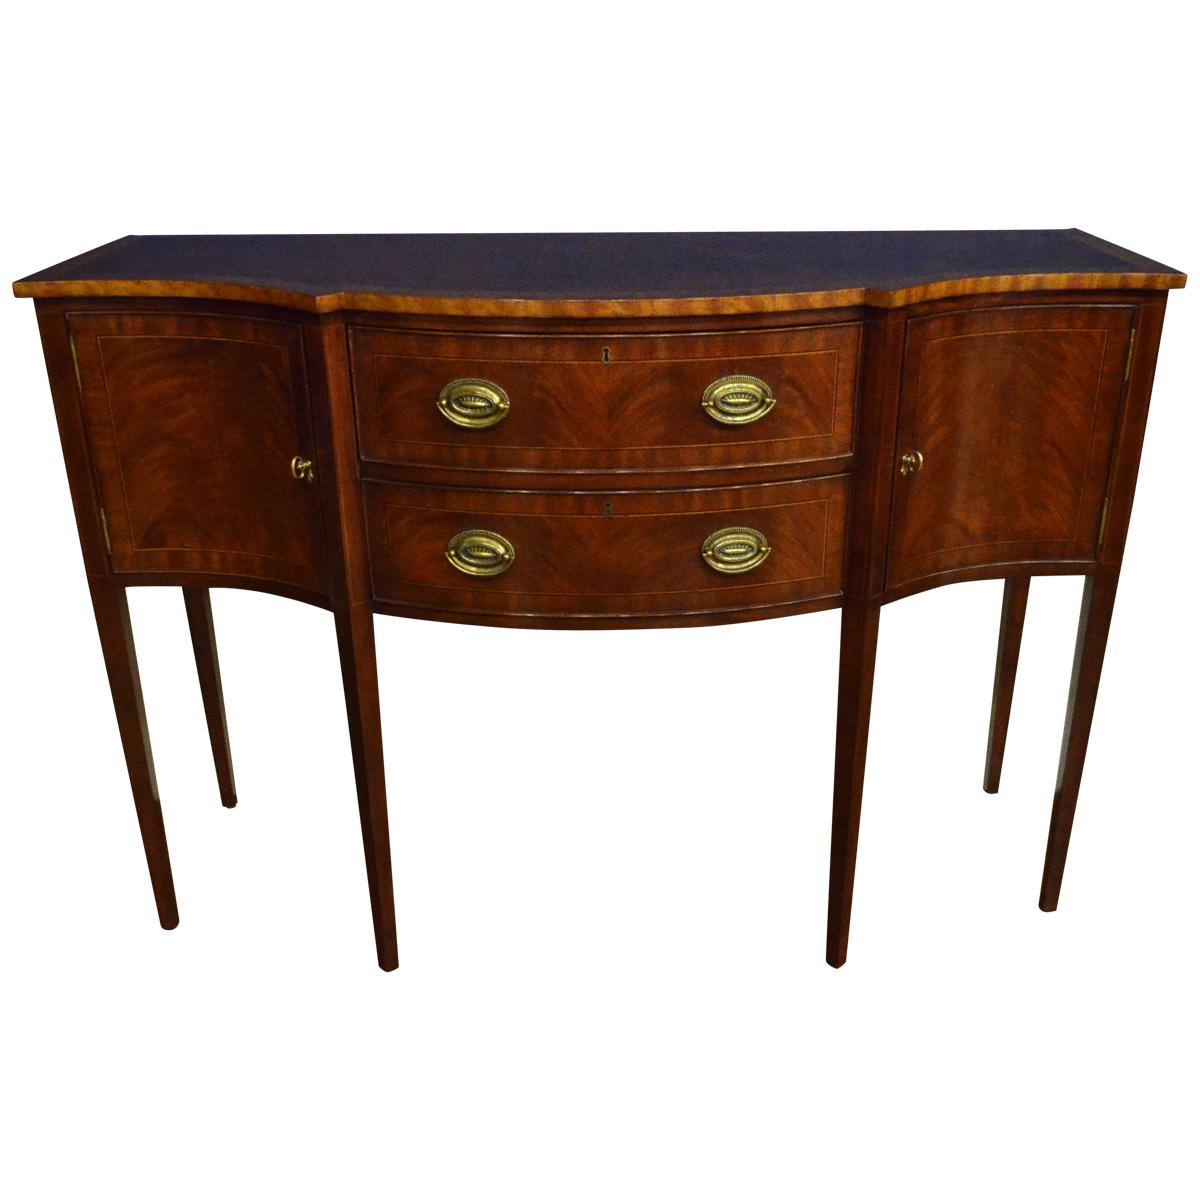 Small Mahogany Hepplewhite Style Sideboard by Leighton Hall